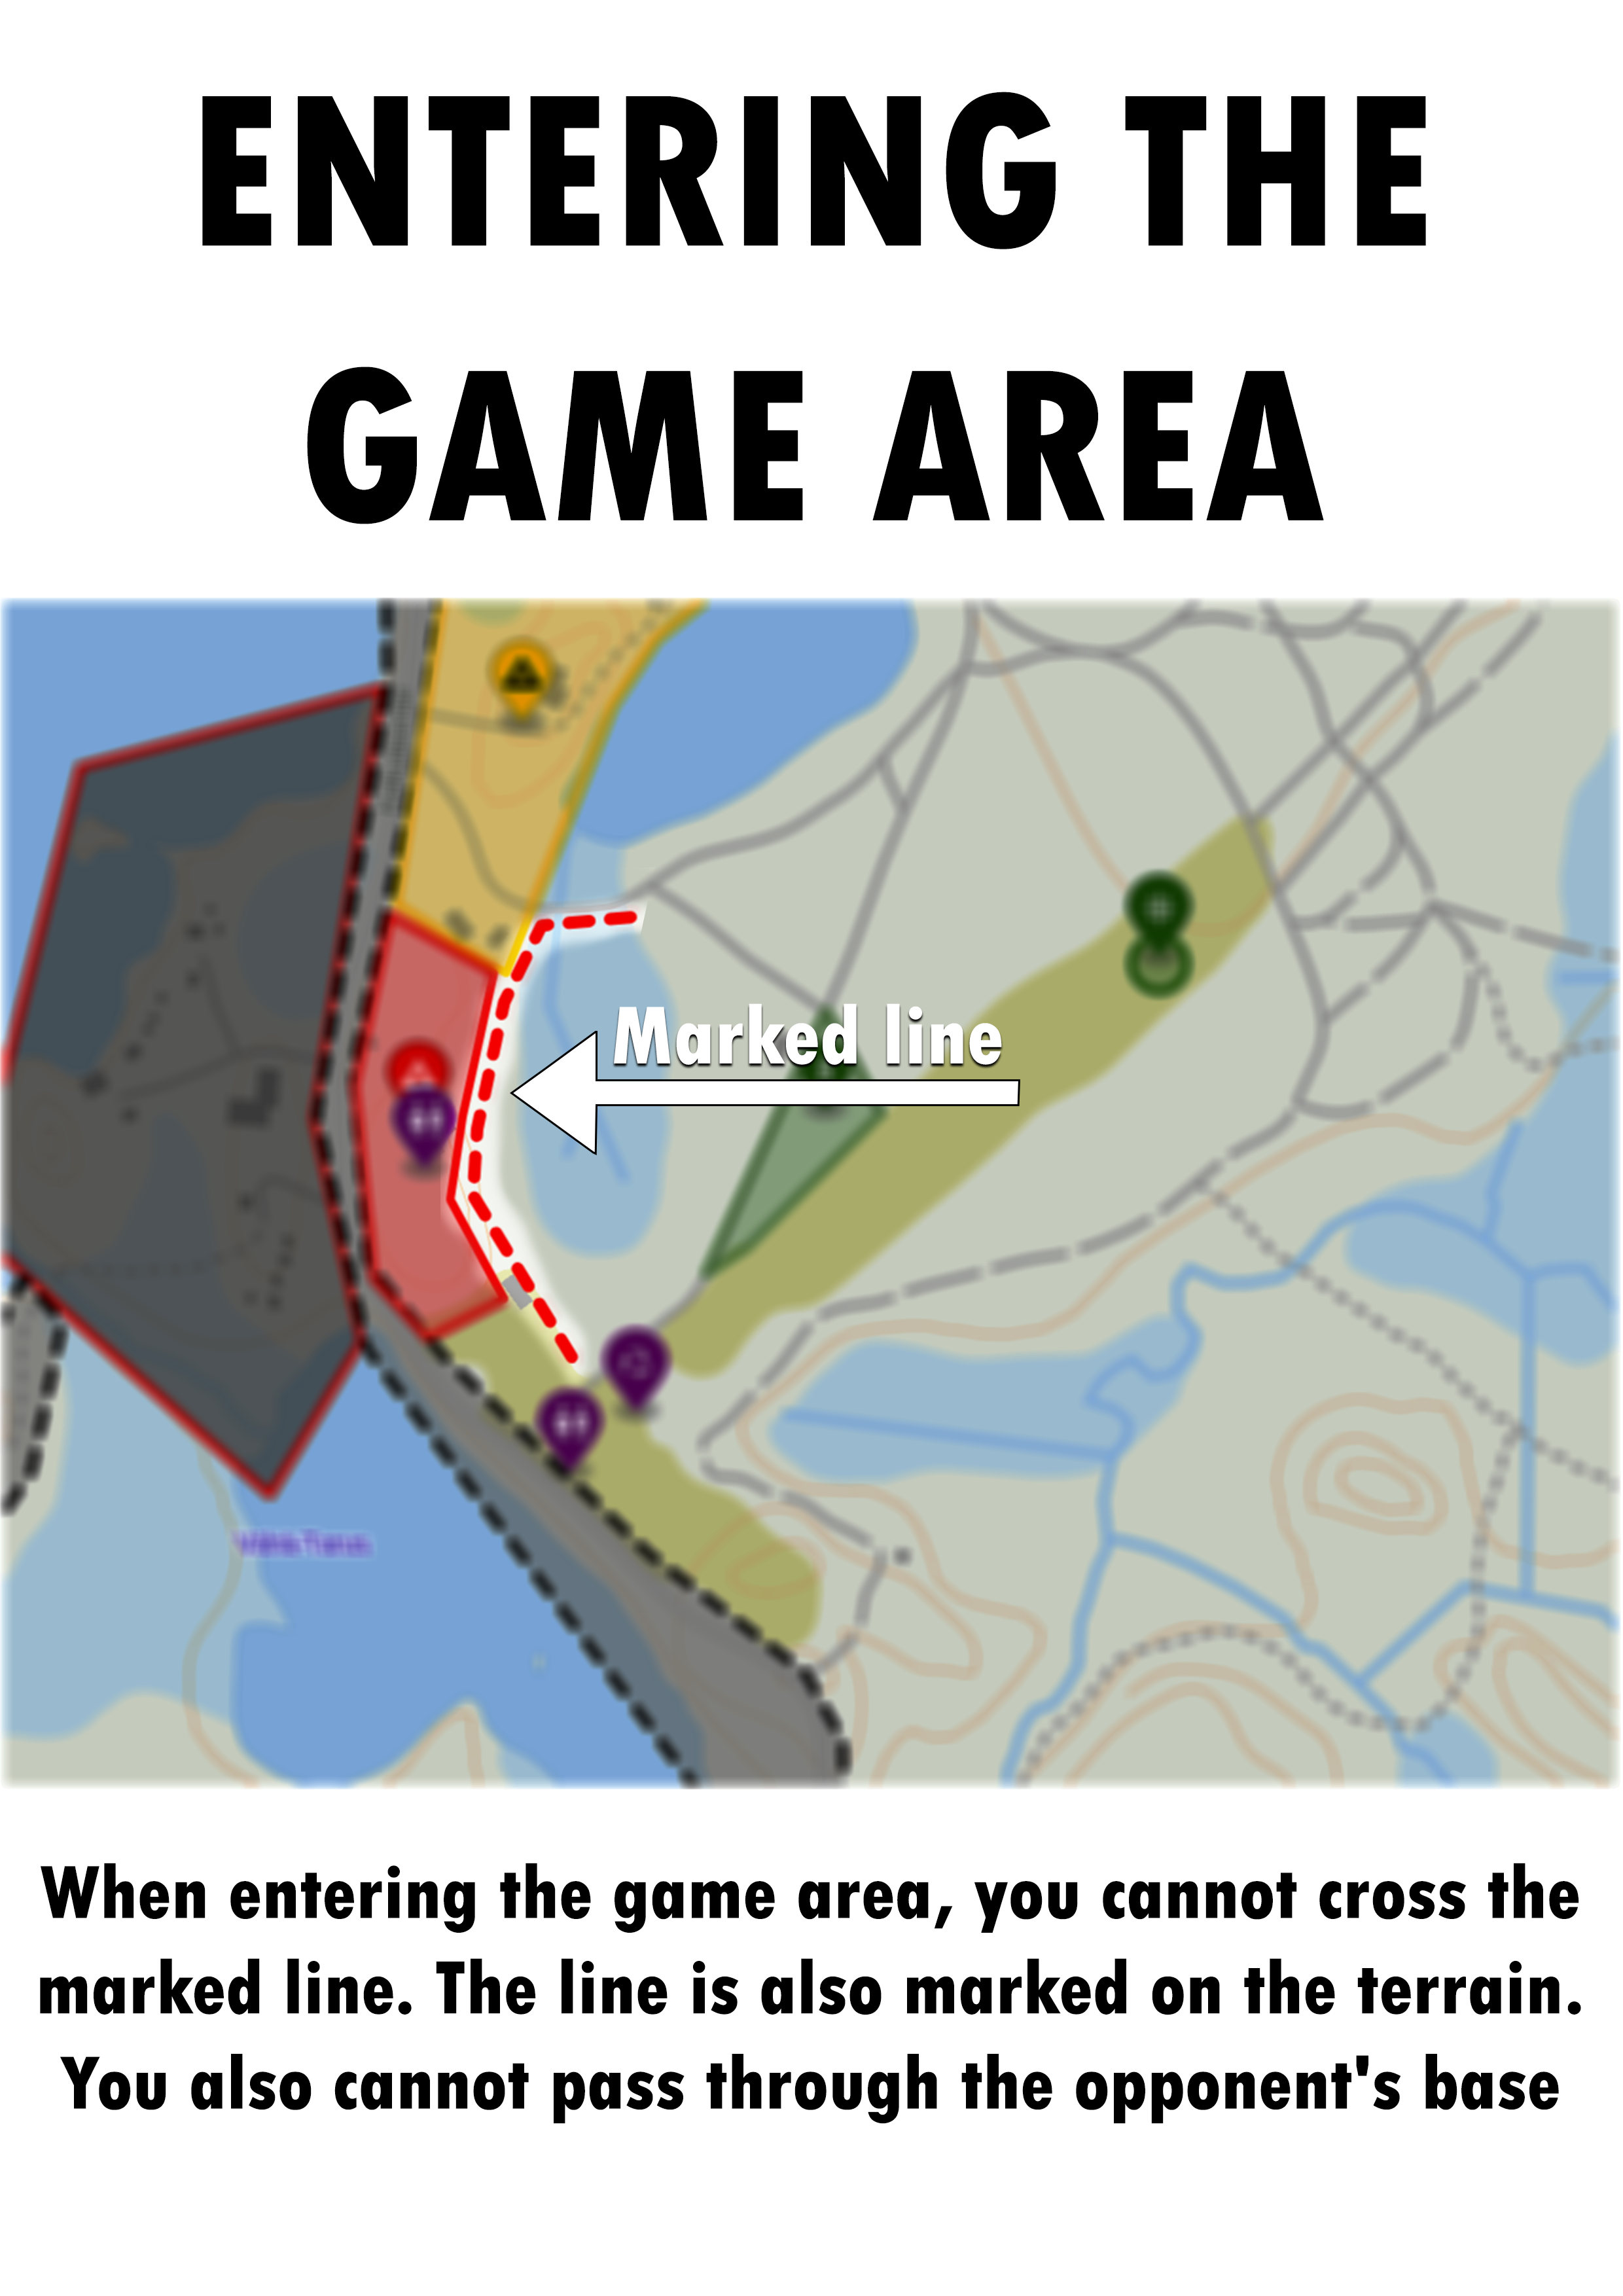 Entering the game area